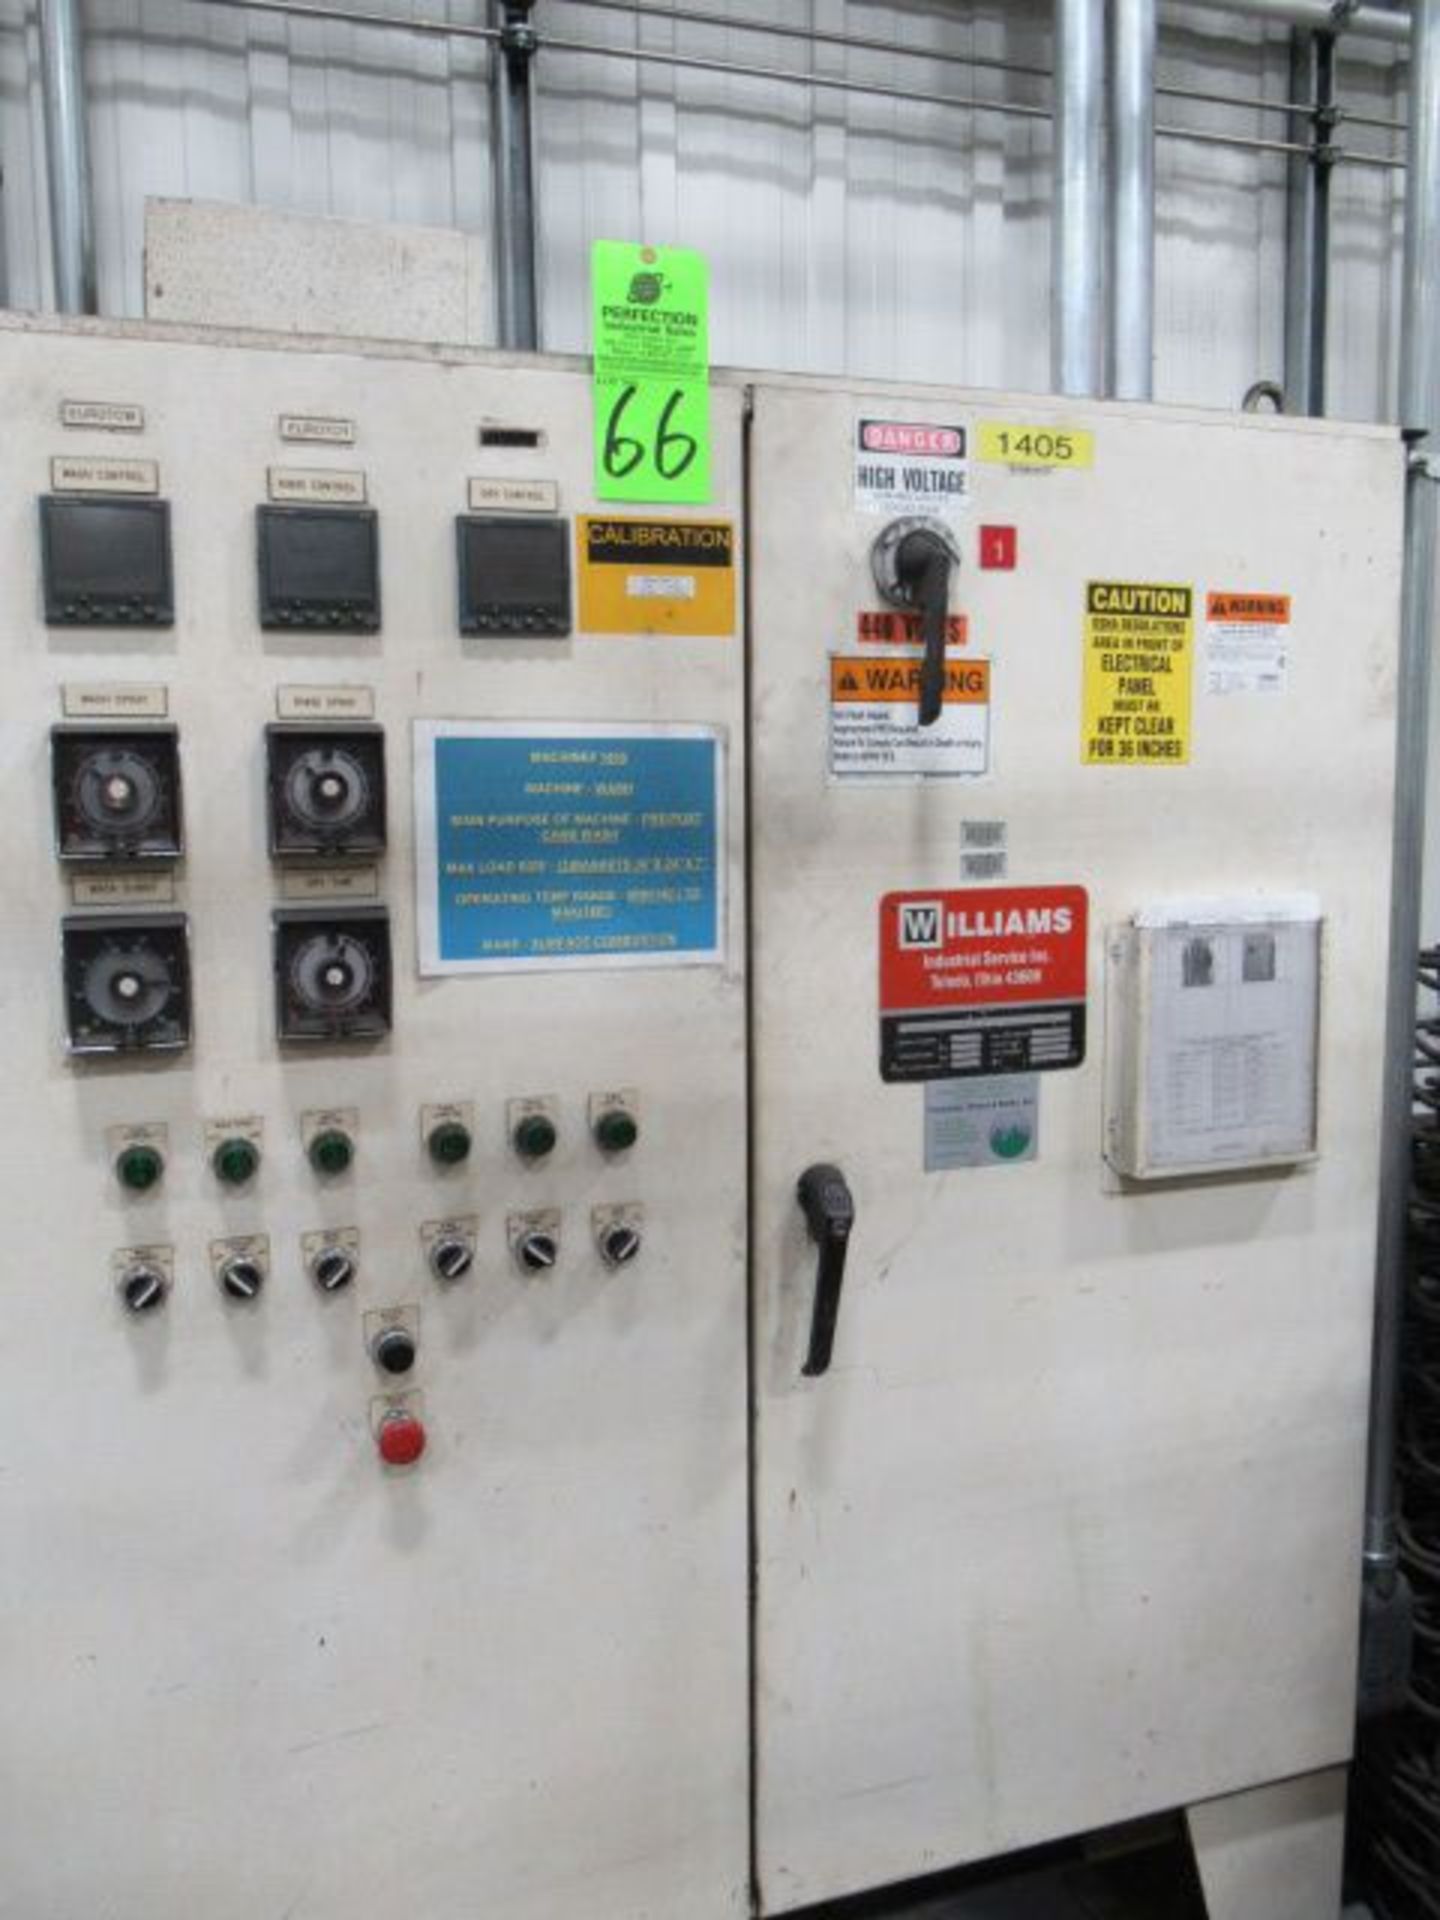 1999 SURFACE COMBUSTION WILLIAMS Pre/Post Carburizing 2 Stage Wash System, s/n 02498, w/ 24”x36” - Image 4 of 4